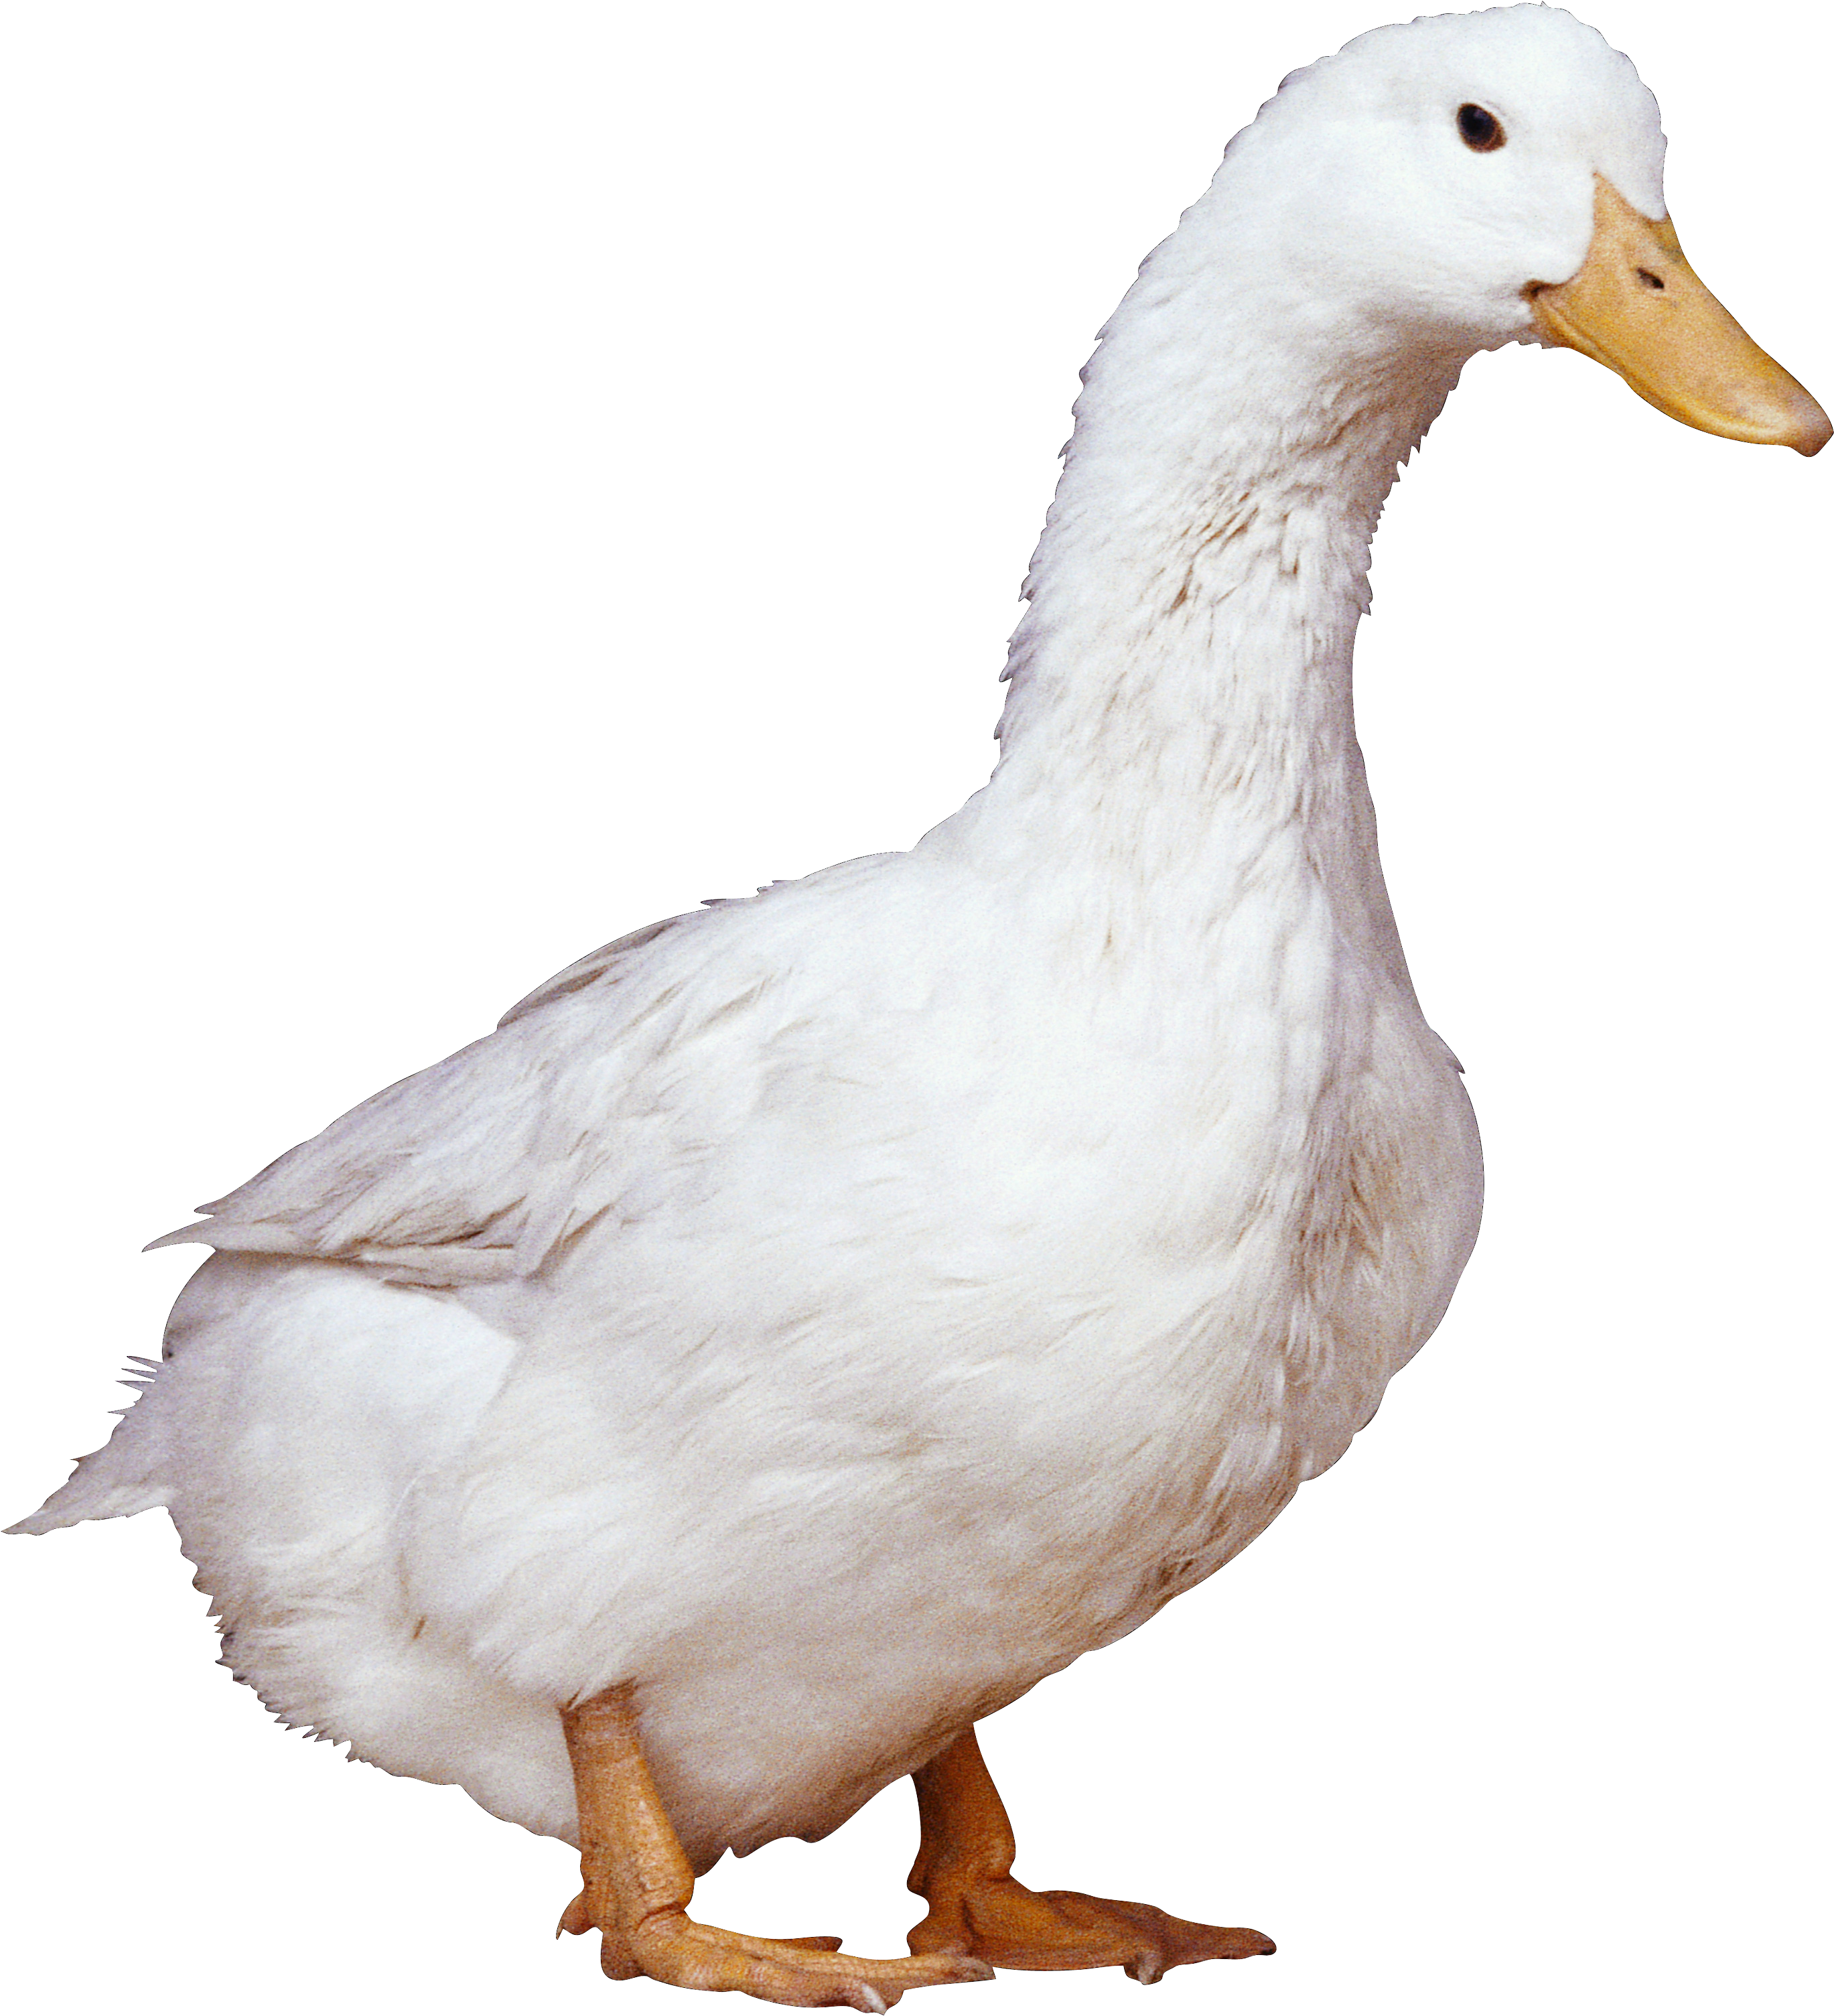 In png web icons. Ducks clipart peking duck